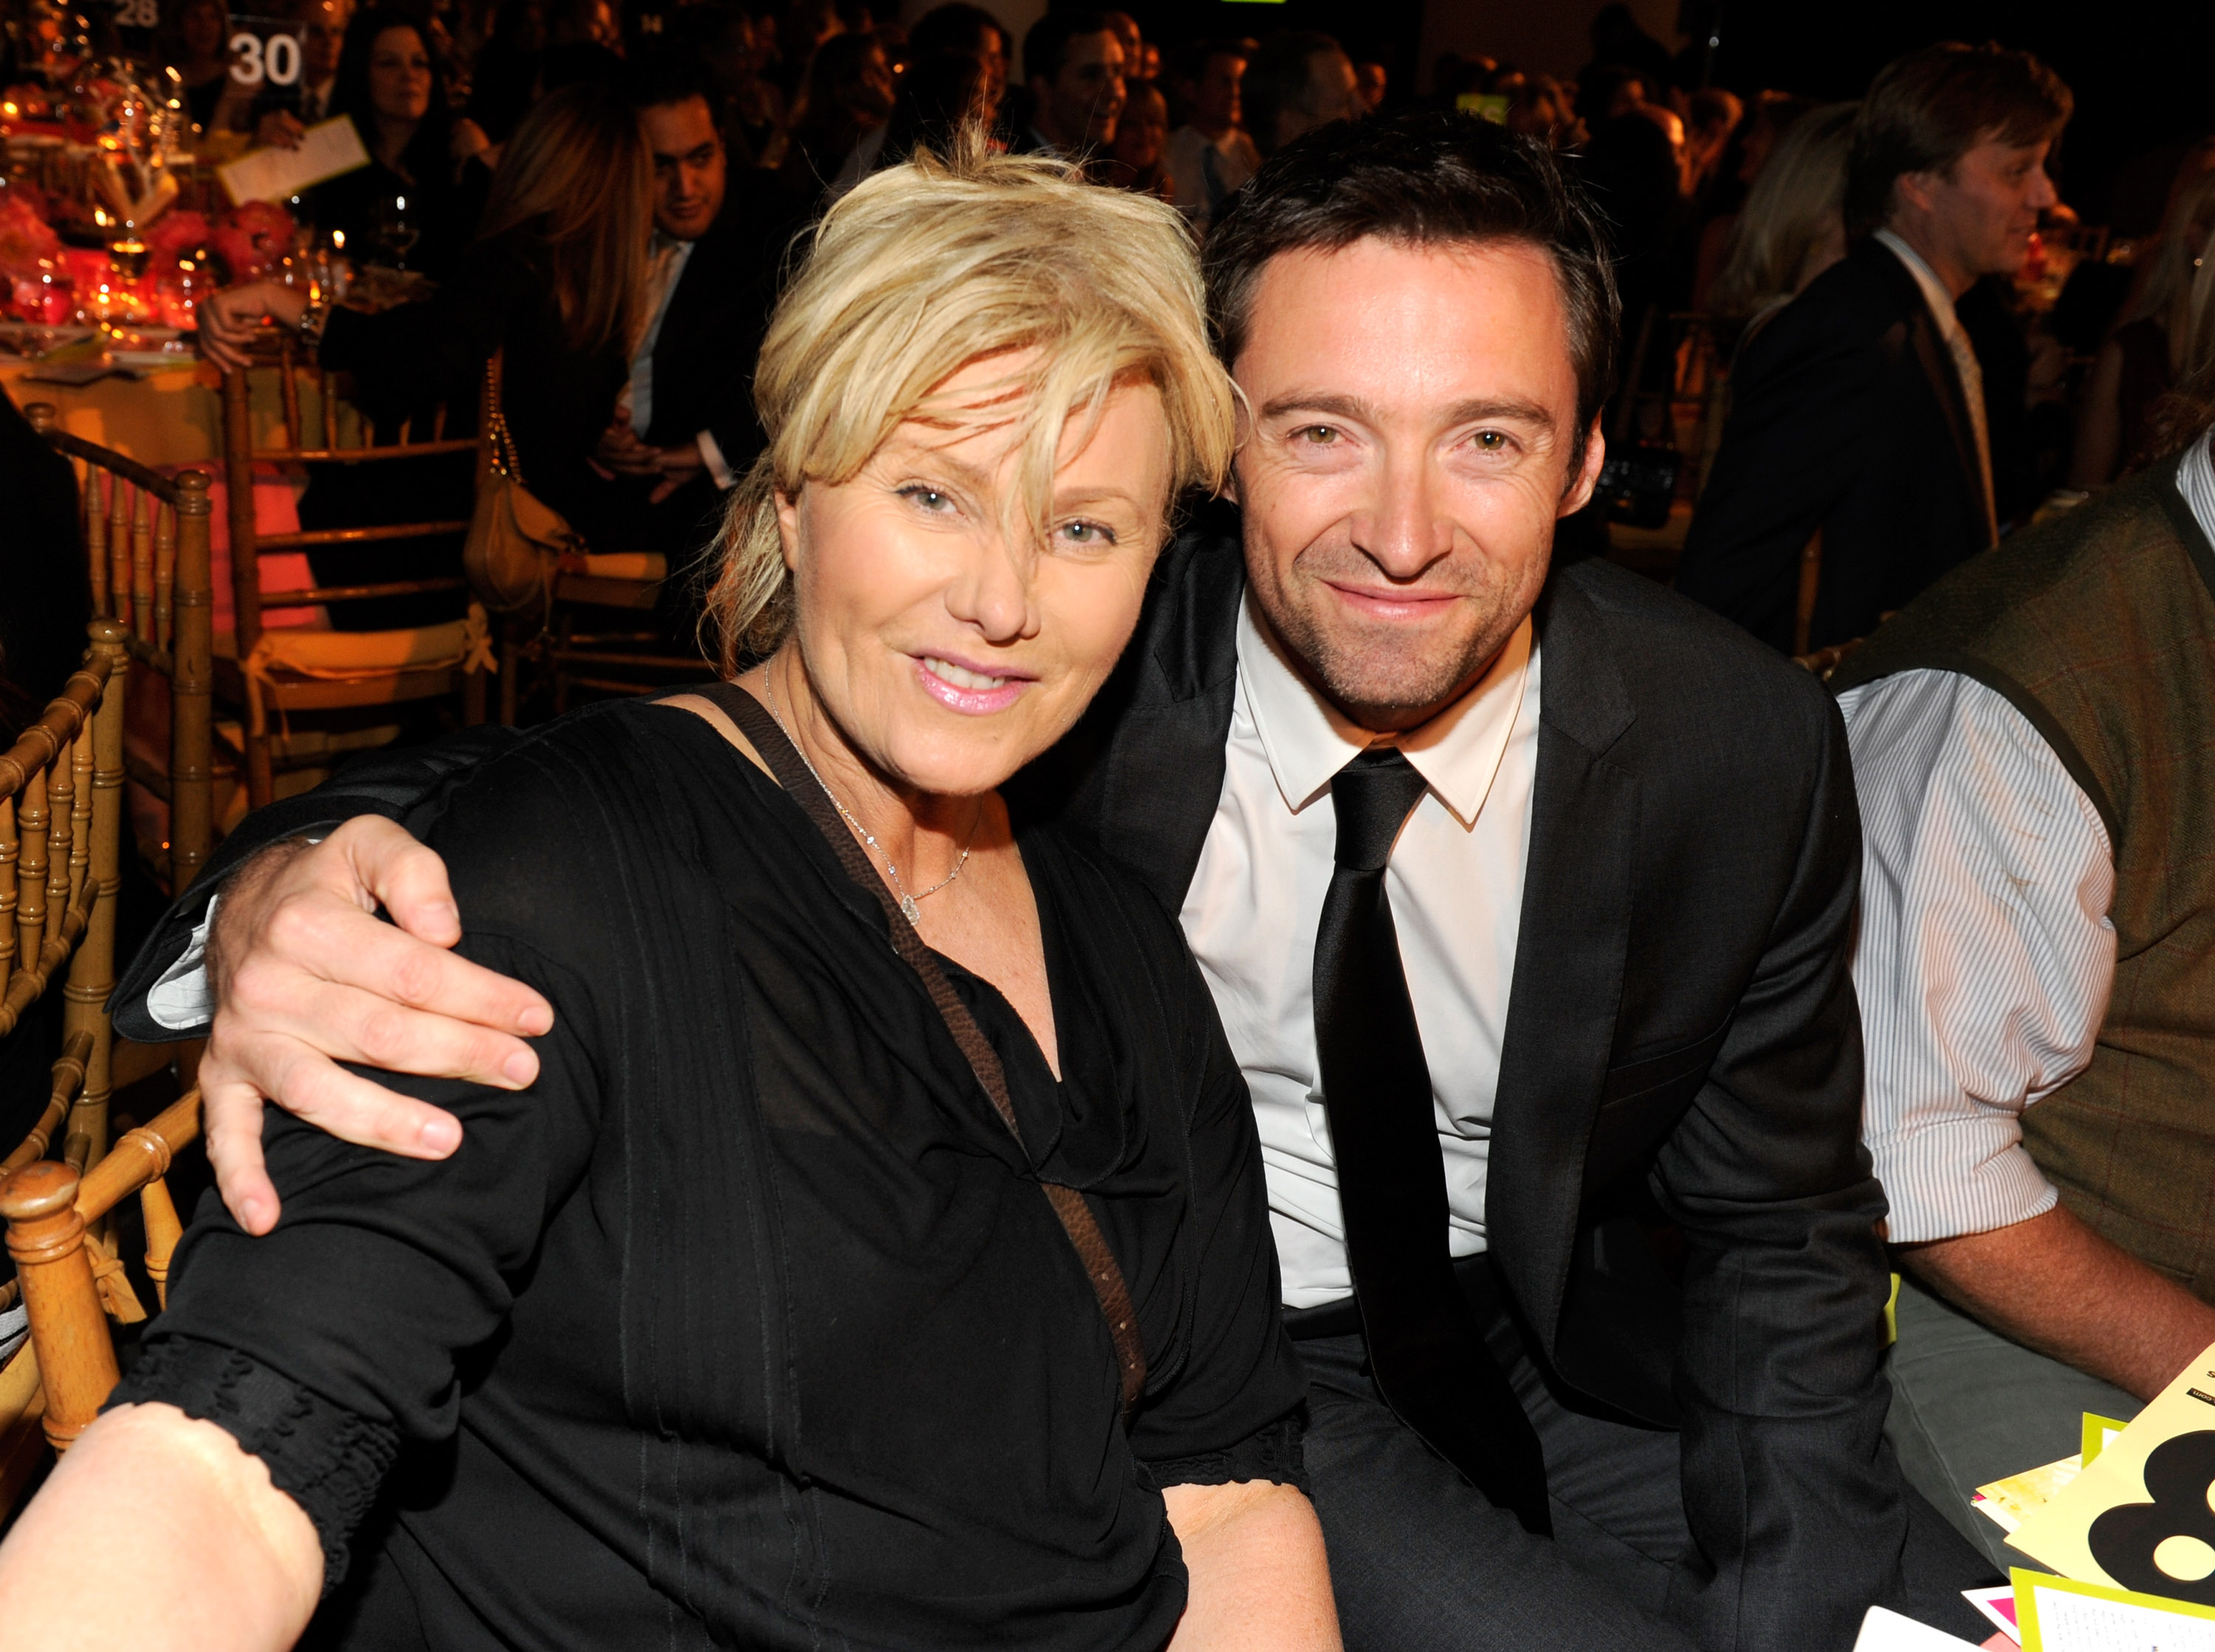 Hugh Jackman and his wife Deborah Furness in New York in 2011 | Source: Getty Images